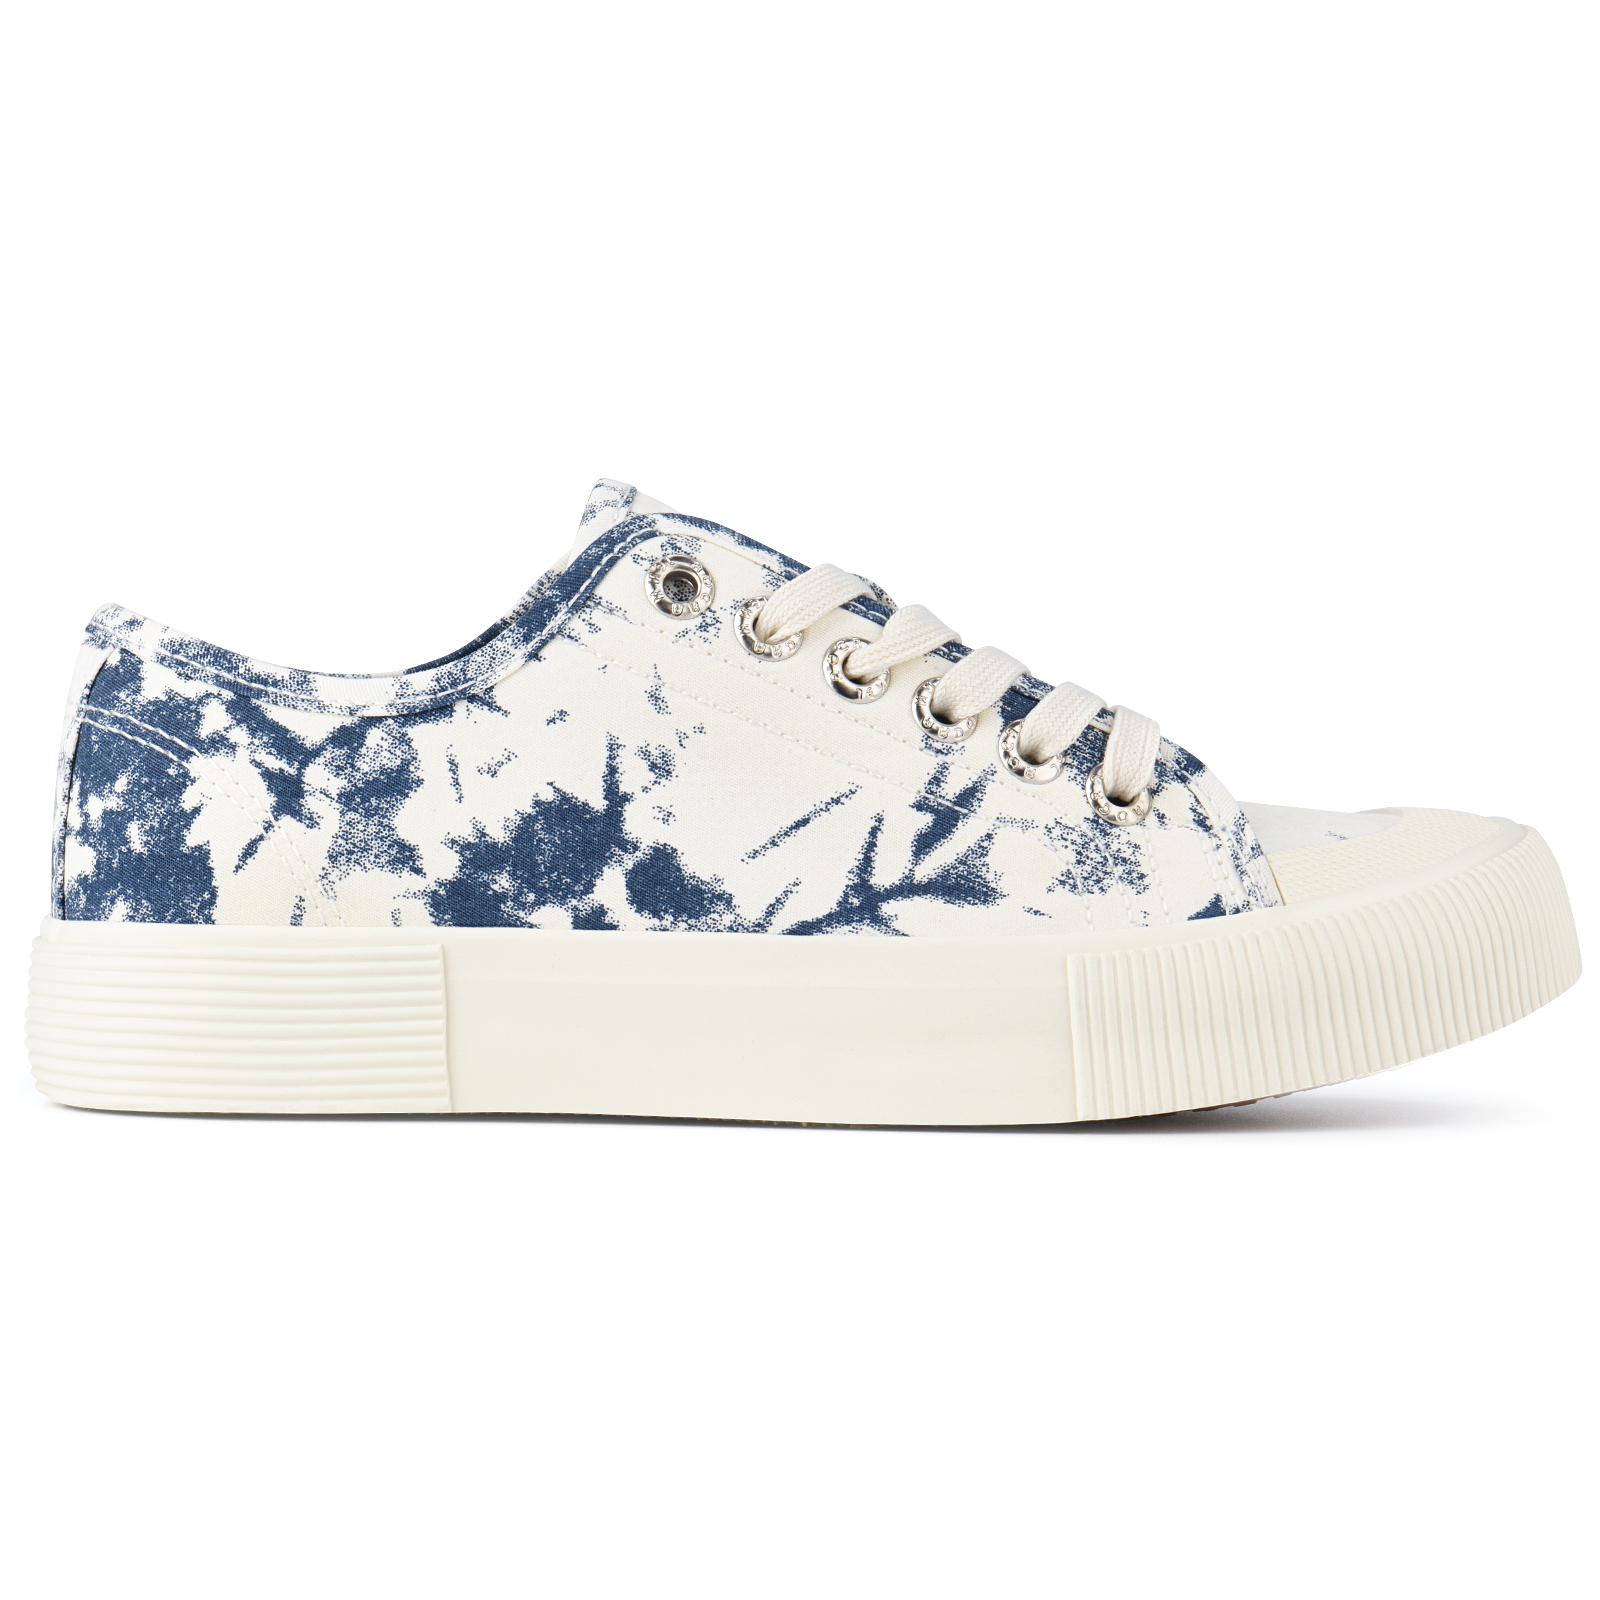 JENN ARDOR Womens Canvas Shoes Low Tops Lace up Fashion Sneakers for Walking Tennis - image 4 of 8